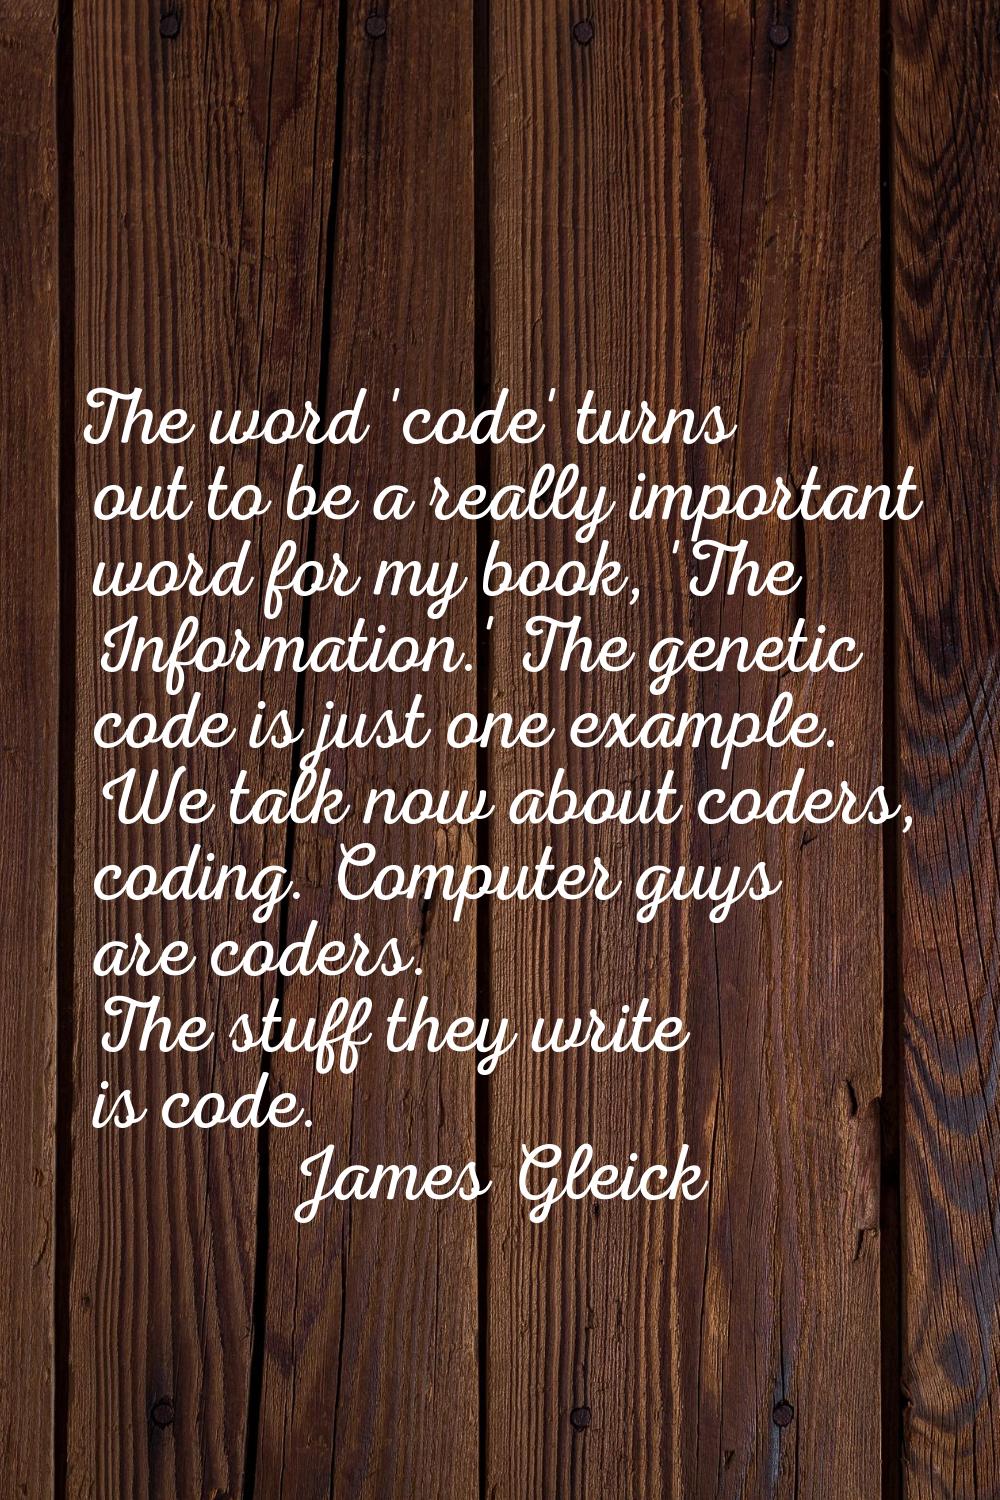 The word 'code' turns out to be a really important word for my book, 'The Information.' The genetic